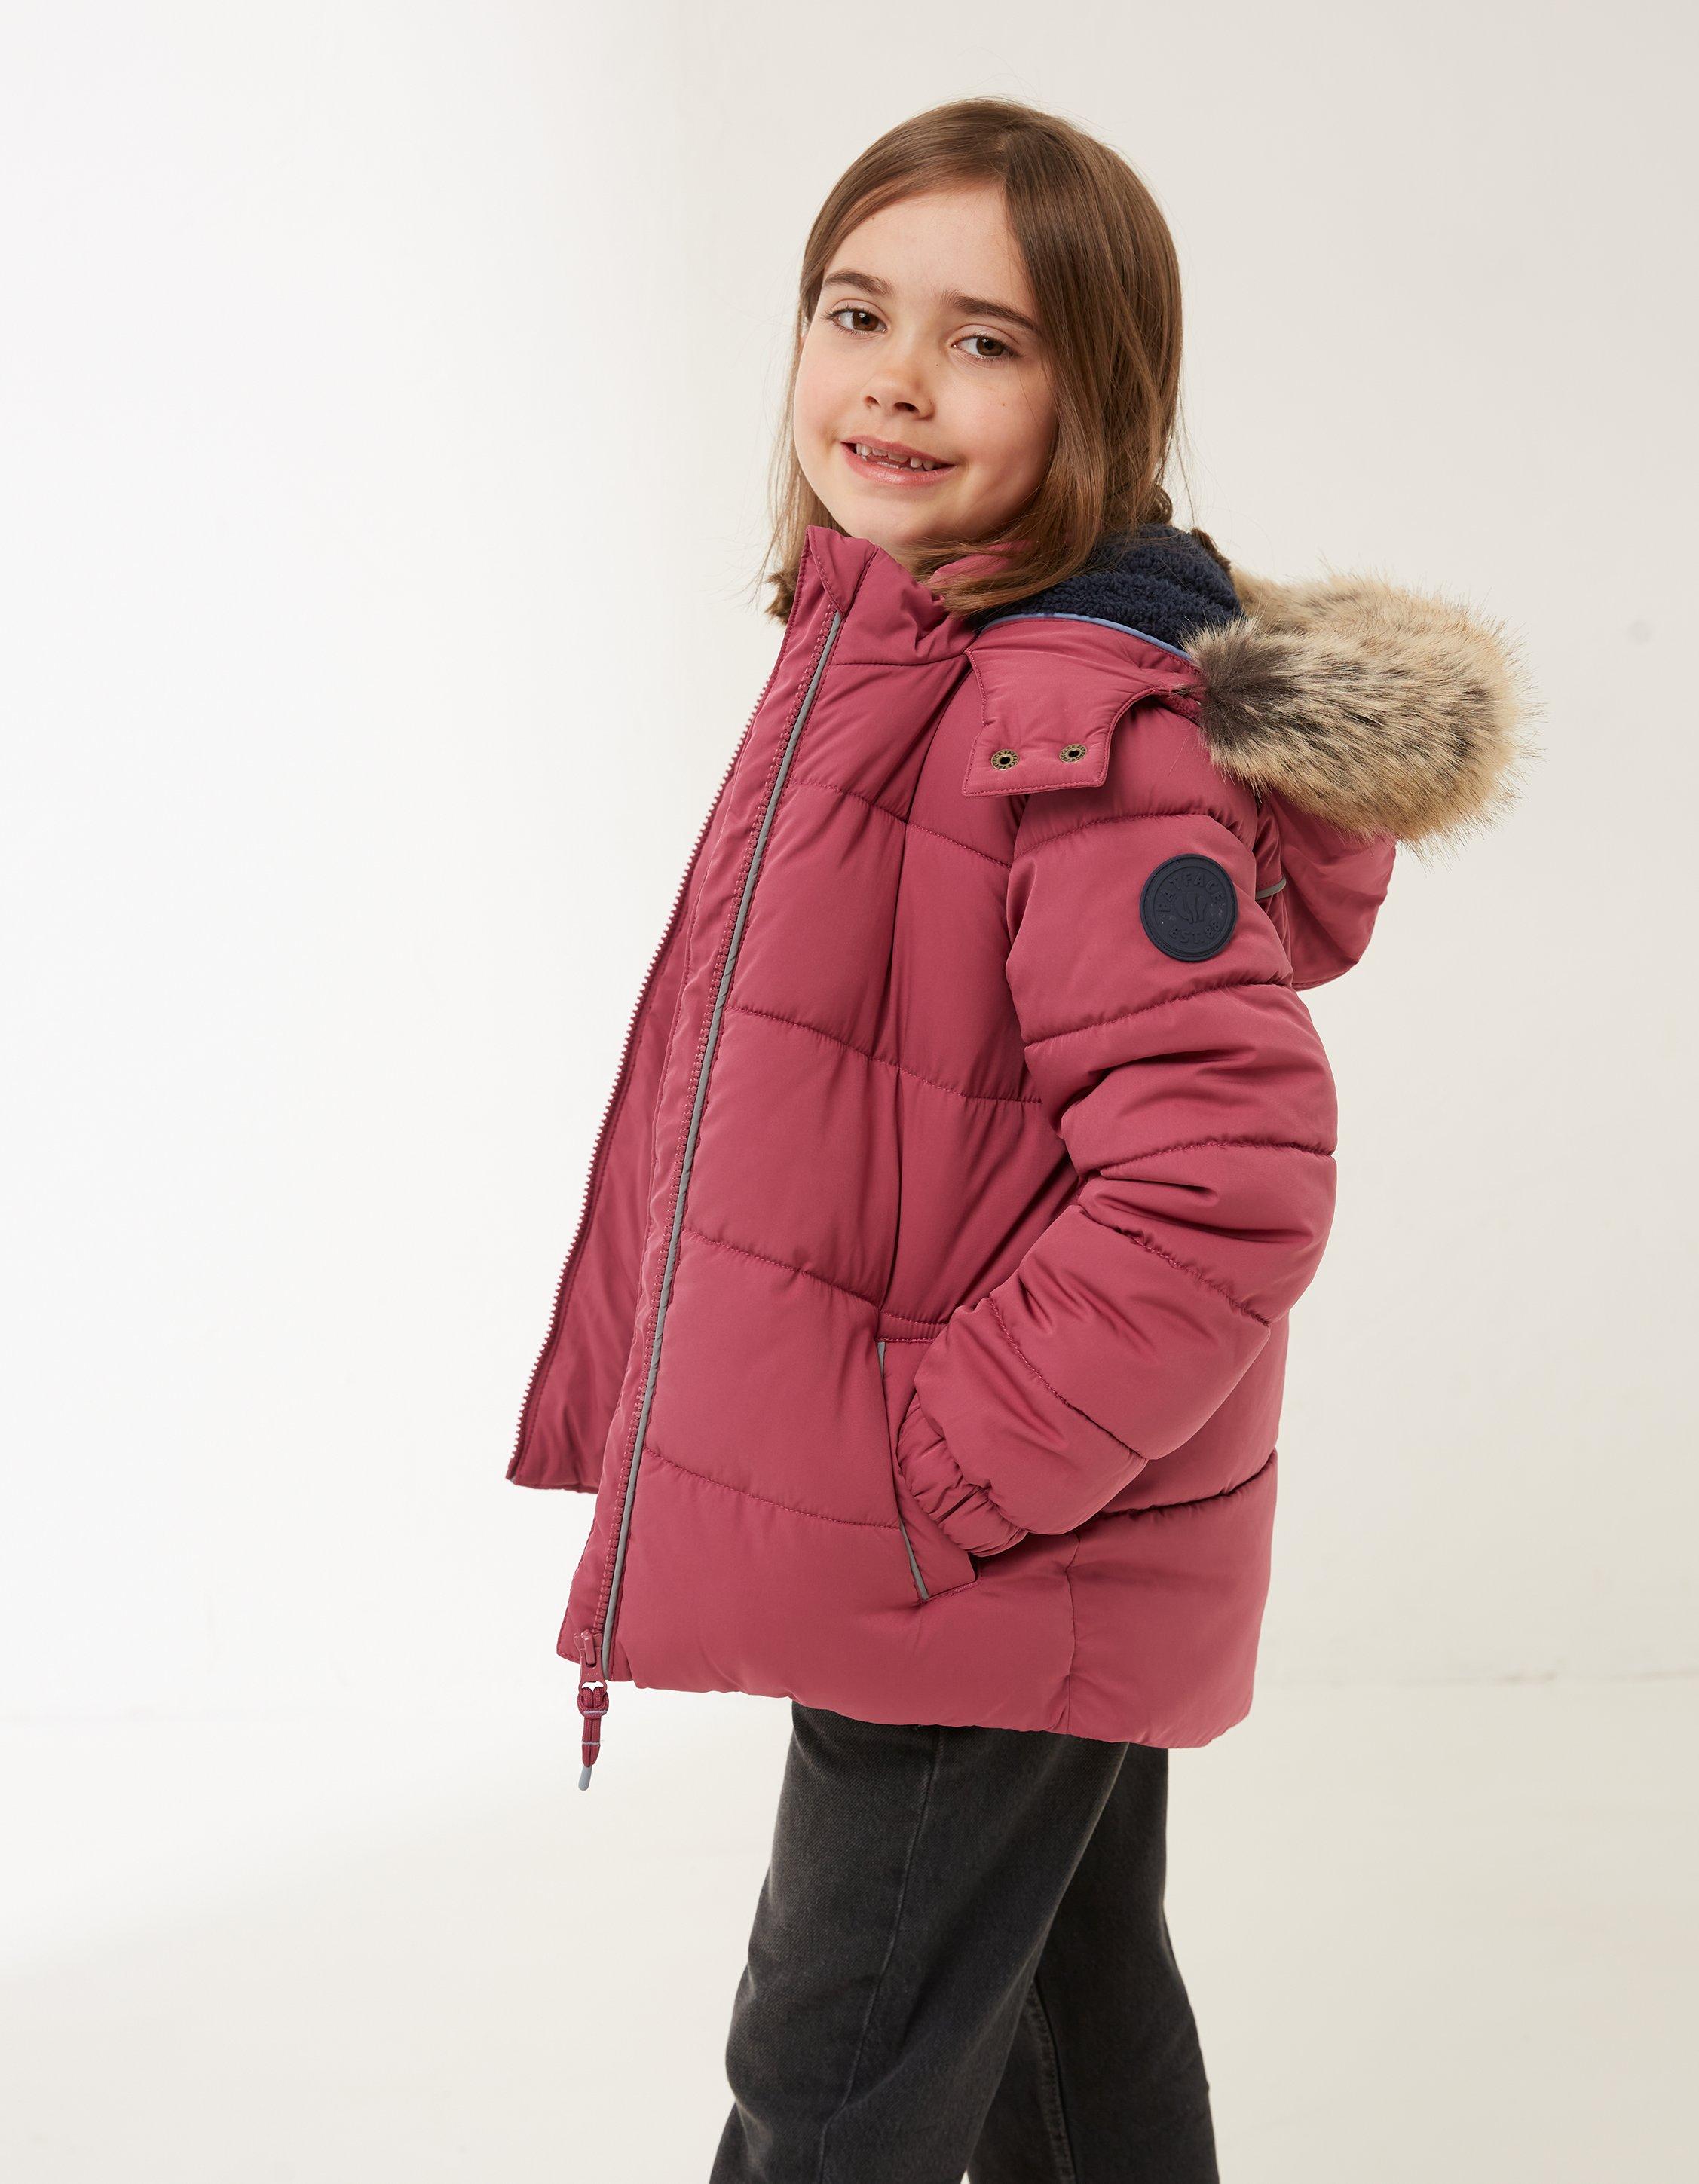 Kids' Clothing, Footwear & Accessories - FatFace US